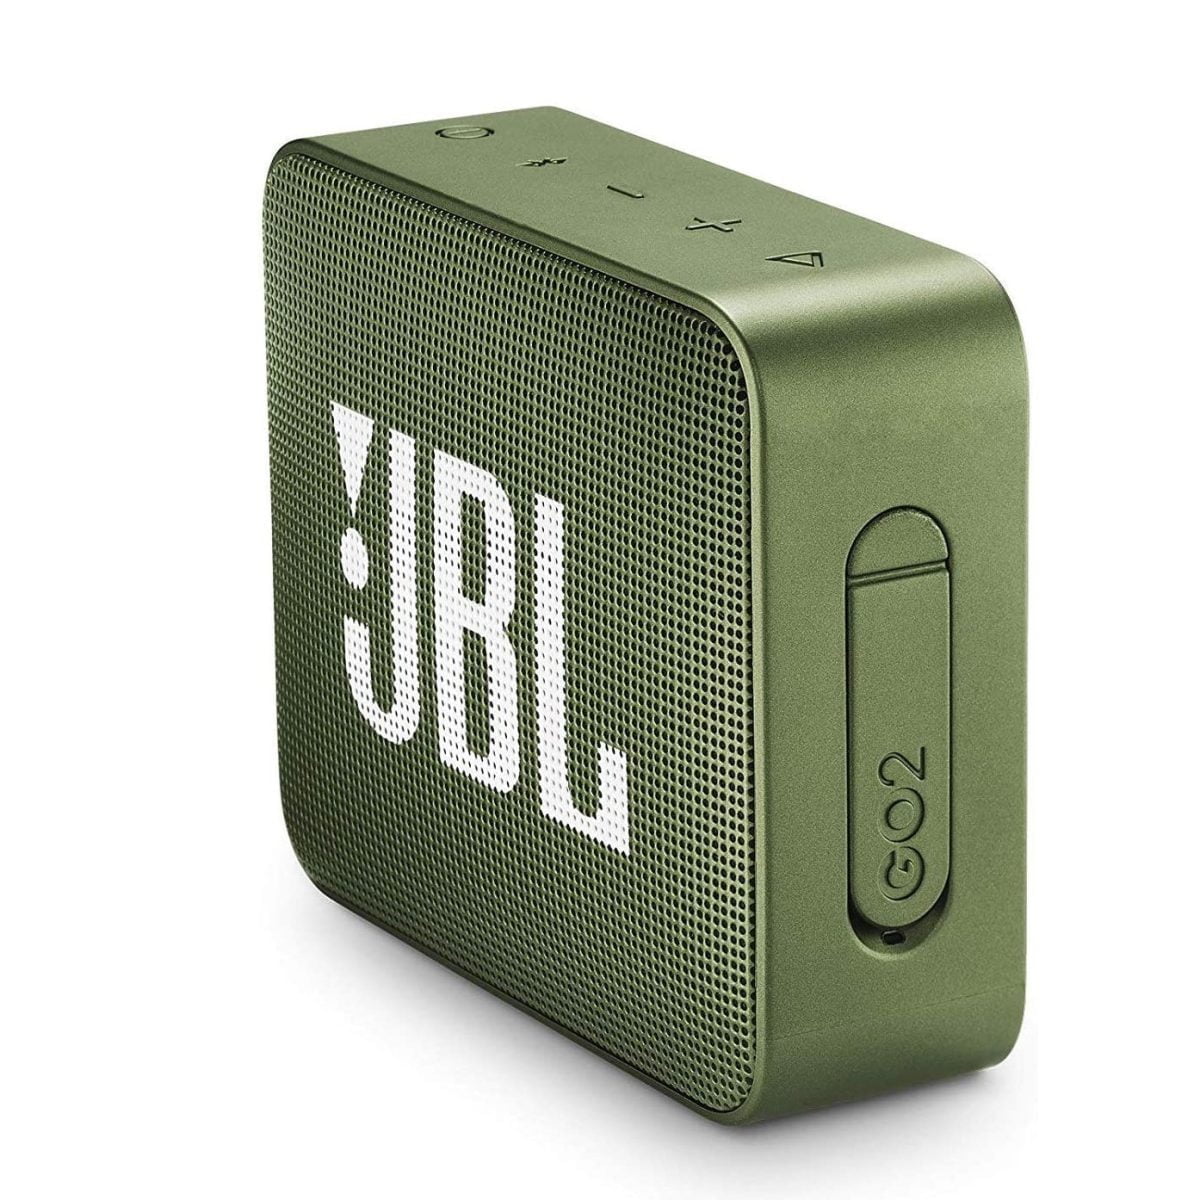 81Cyu3Jfzl. Ac Sl1500 Jbl &Lt;H1&Gt;Jbl Go 2 Portable Bluetooth Speaker - Green&Lt;/H1&Gt; Https://Youtu.be/9Fgn9Bkal2Q &Lt;P Class=&Quot;Short-Desc&Quot;&Gt;The Jbl Go 2 Is A Full-Featured Waterproof Bluetooth Speaker To Take With You Everywhere. Wirelessly Stream Music Via Bluetooth For Up To 5 Hours Of Continuous Jbl Quality Sound. Making A Splash With Its New Ipx7 Waterproof Design, Go 2 Gives Music Lovers The Opportunity To Bring Their Speaker Poolside, Or To The Beach. Go 2 Also Offers Crystal Clear Phone Call Experience With Its Built-In Noise-Cancelling Speakerphone. Crafted In A Compact Design With 12 Eye-Catching Colors To Choose From, Go 2 Instantly Raises Your Style Profile To All-New Levels.&Lt;/P&Gt; Jbl Speaker Jbl Go 2 Portable Bluetooth Speaker